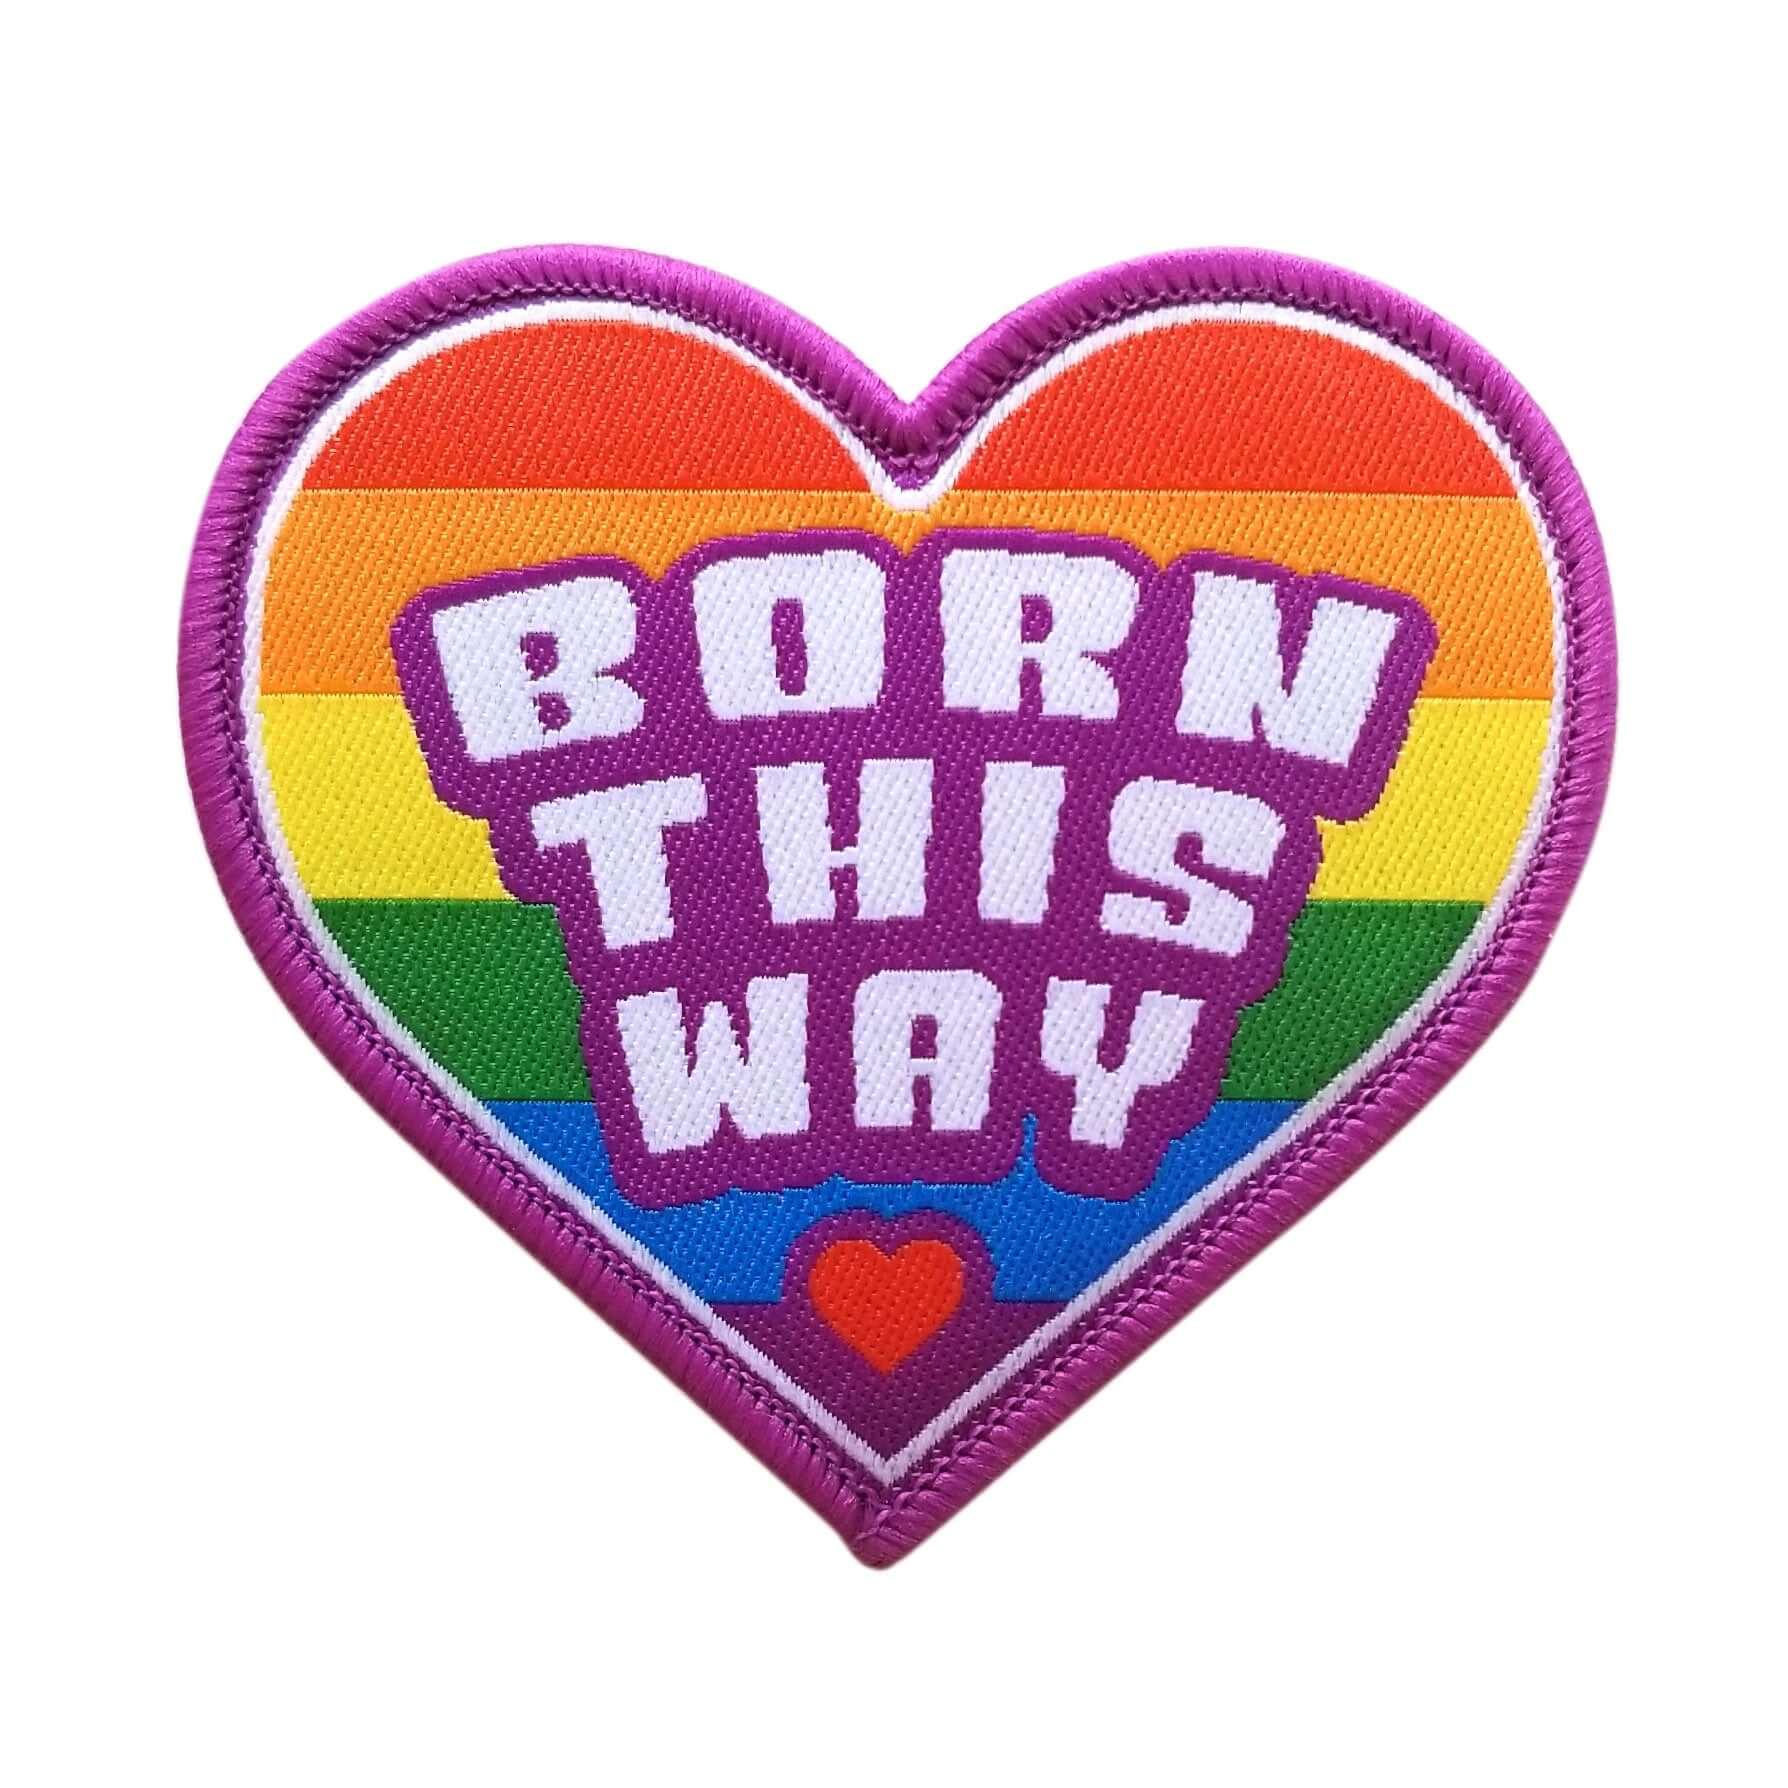 Born This Way Iron On Patch - Rocket Factory Apparel